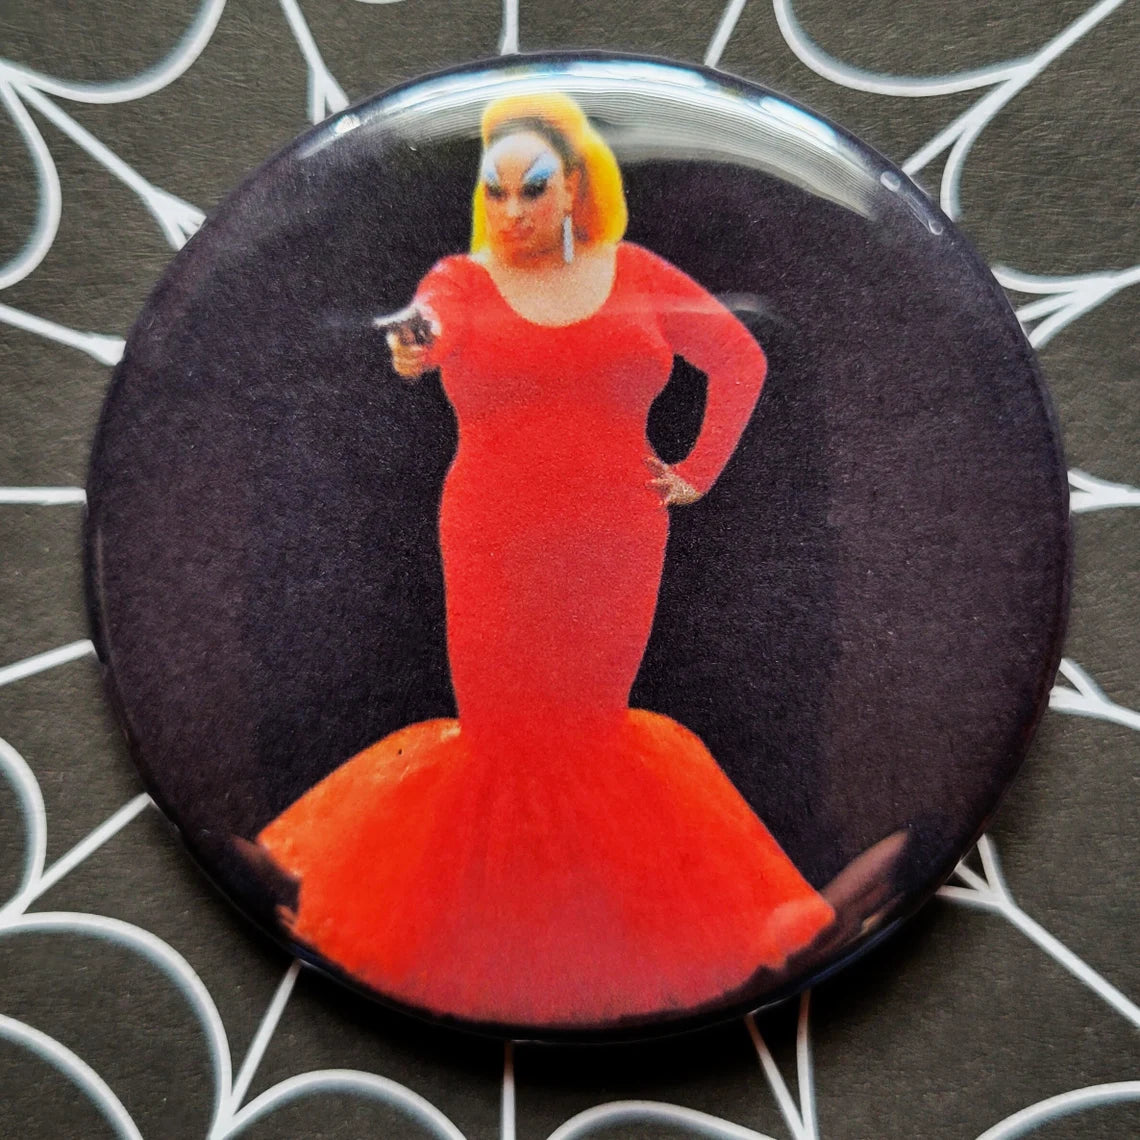 Divine pinback Buttons & Bottle Openers.